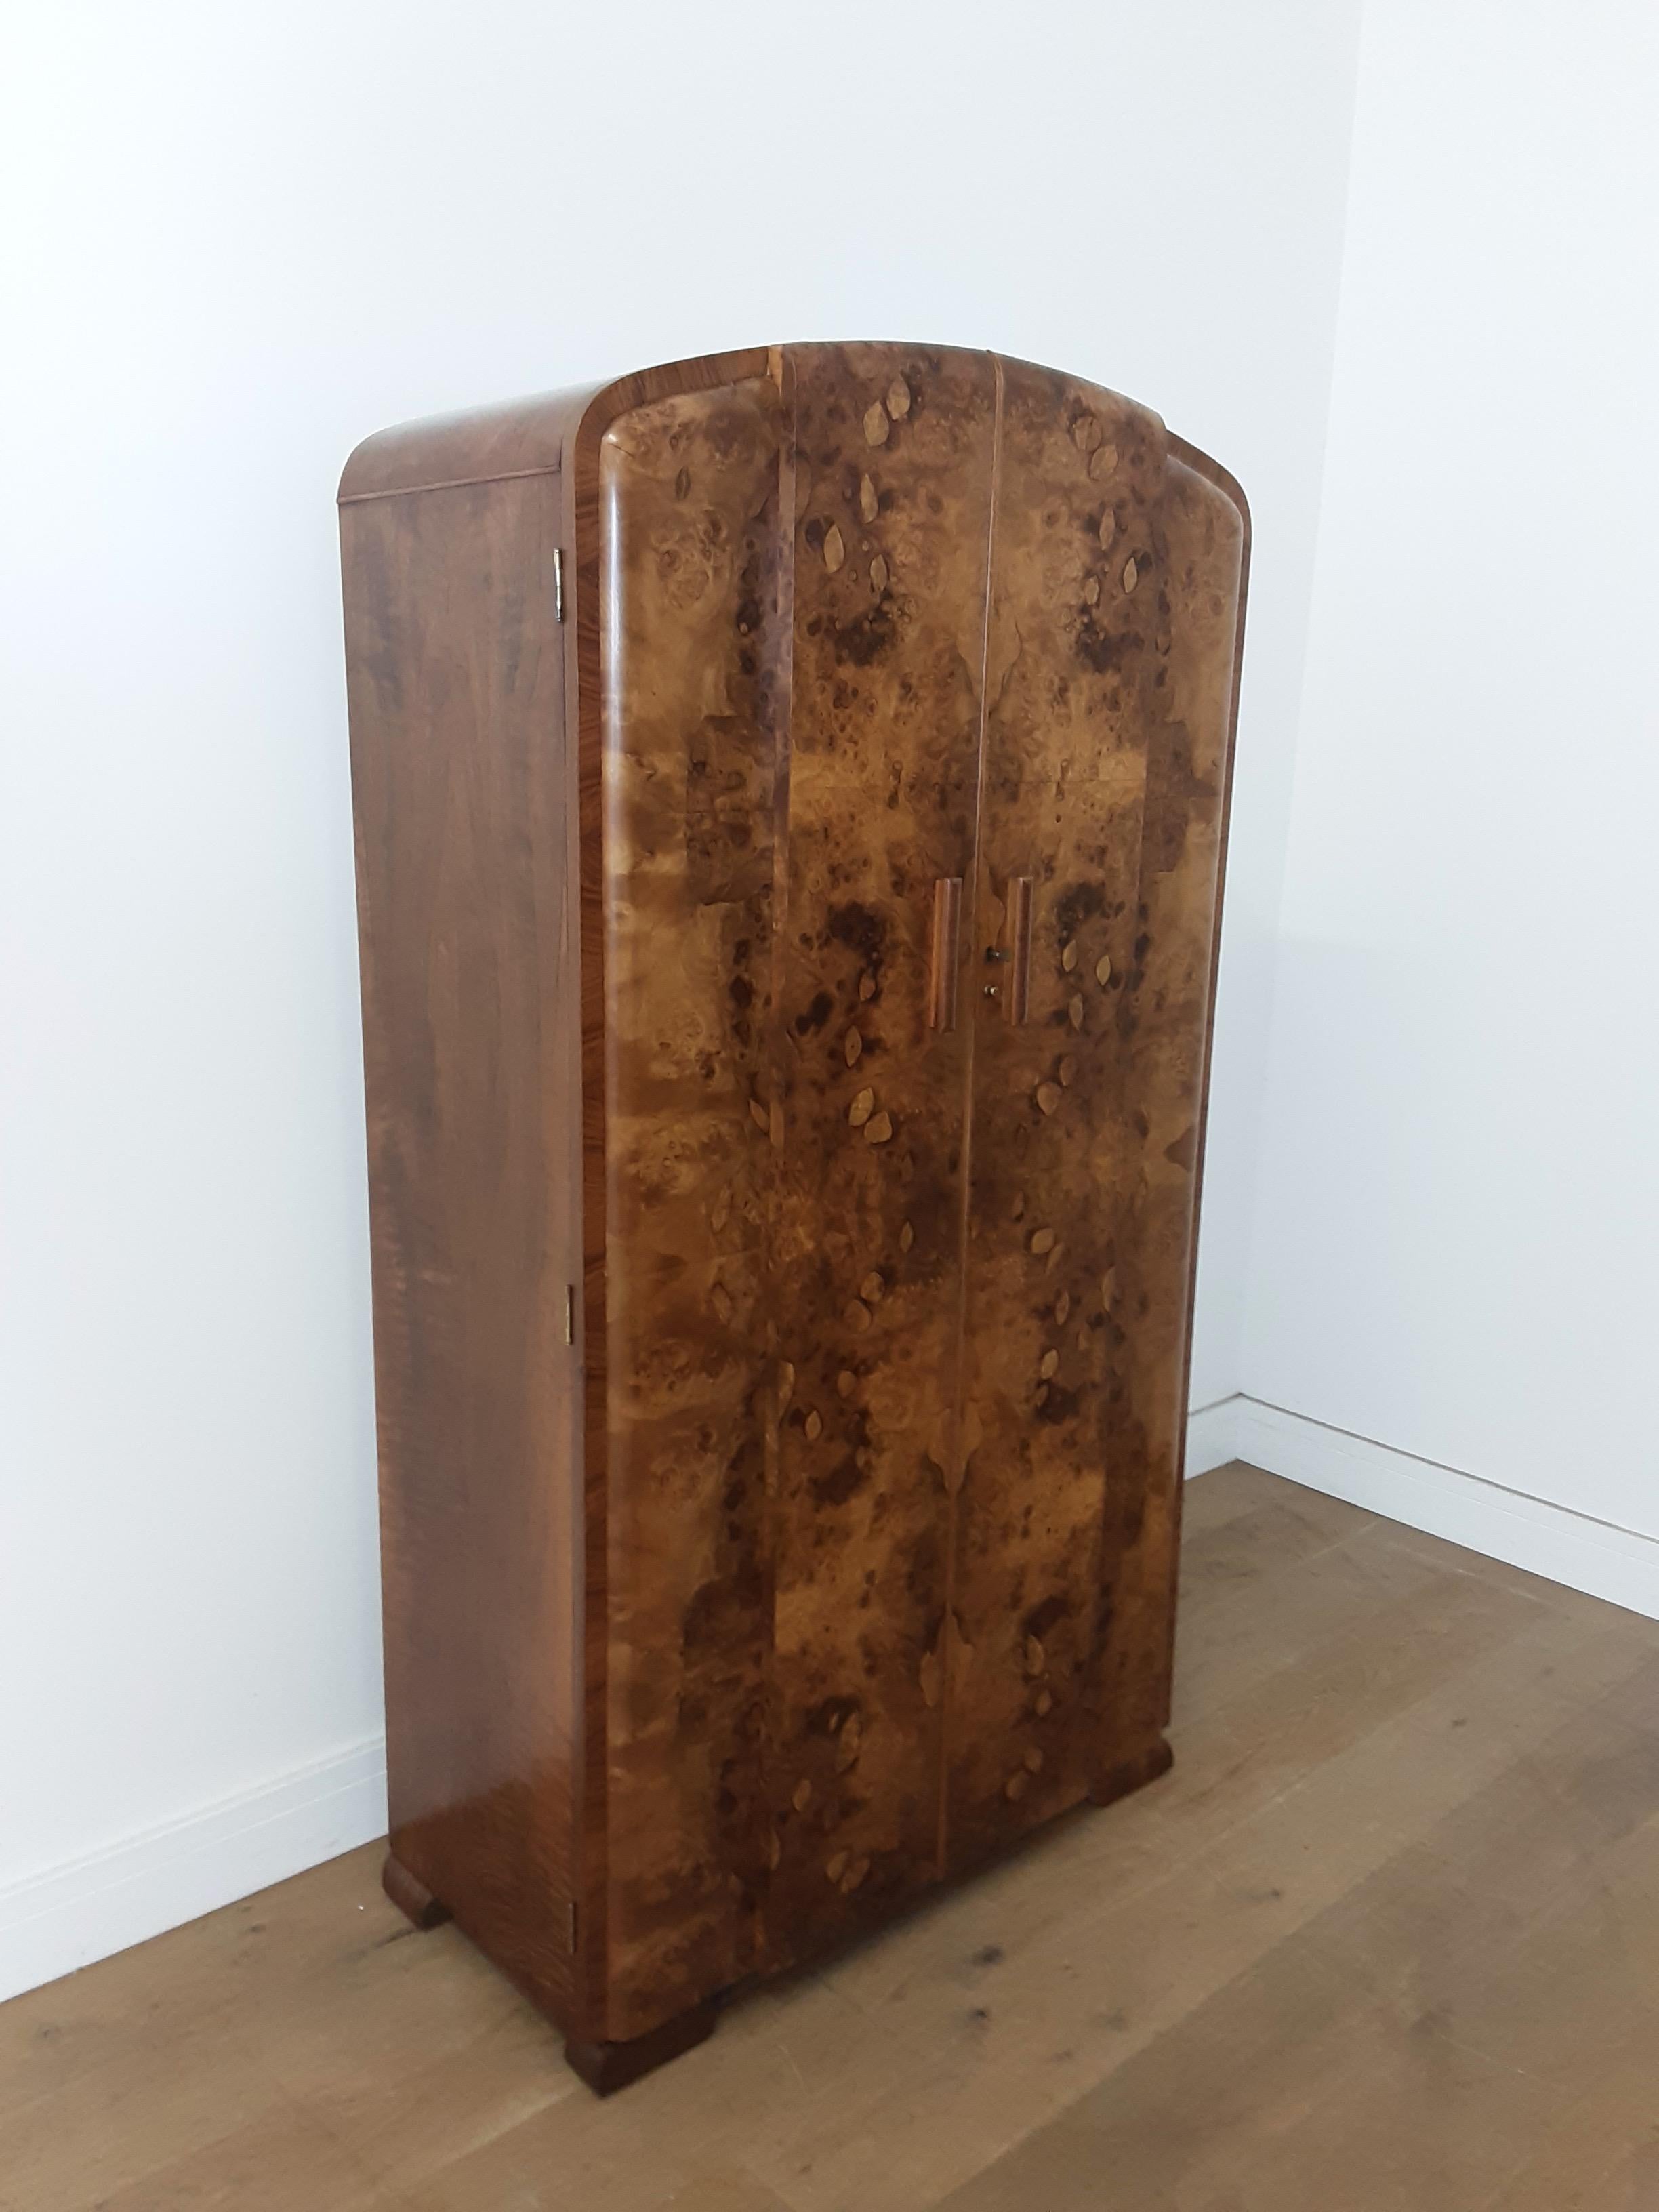 Art deco tall boy in a stunning figured walnut by Grange furnishing stores London.
internally fitted with pull out hanging rail, top shelf and compartmented shelving to the right.
Tall boy is 167 cm h 92 cm w 44 cm d 41 cm d at the sides
British